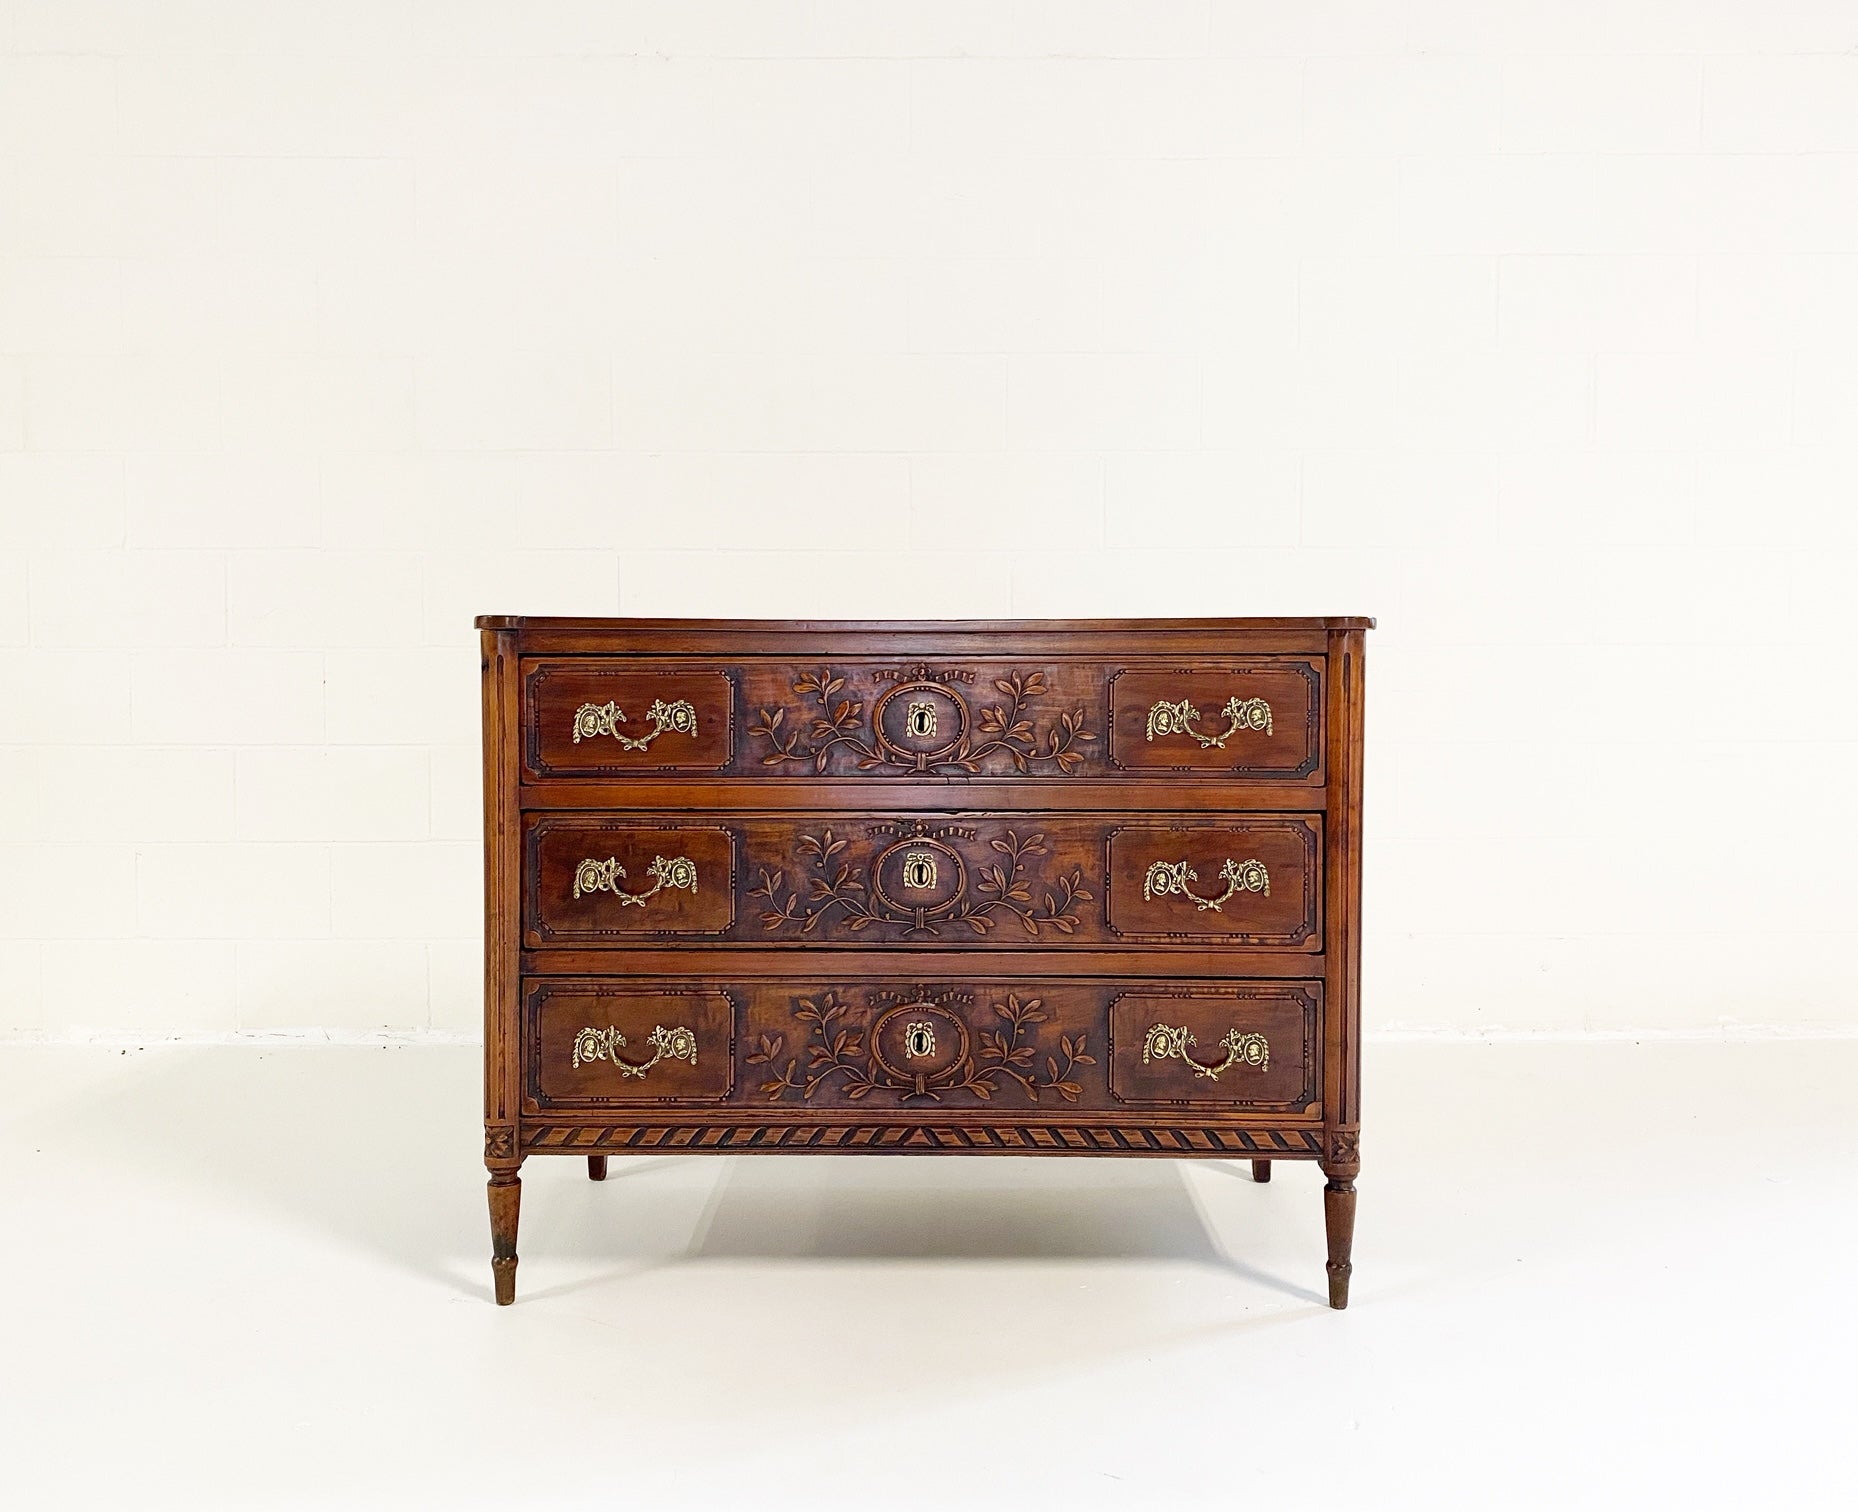 18th Century Continental Neoclassical Walnut Commode